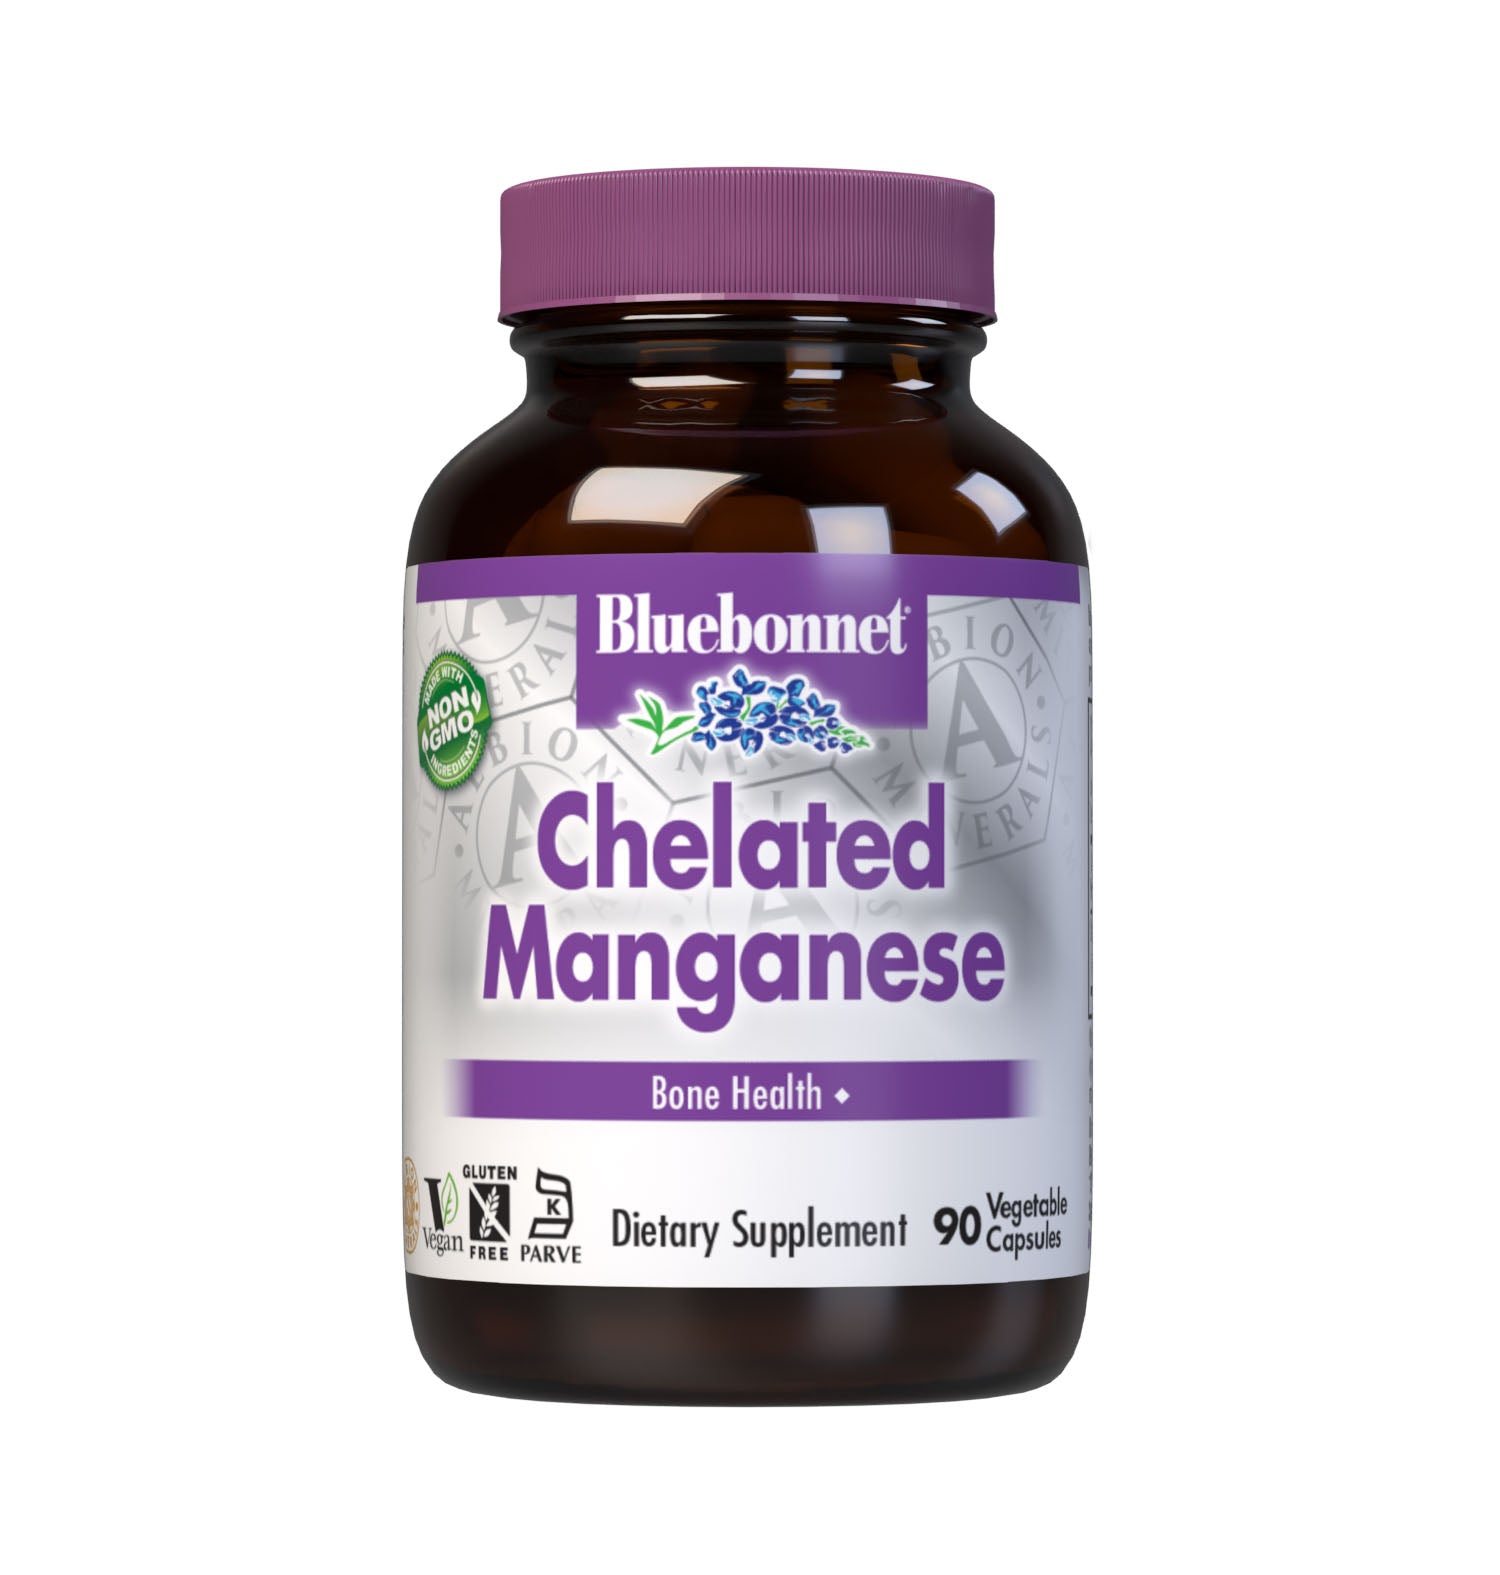 Bluebonnet's Chelated Manganese 90 Vegetable Capsules are formulated with 10 mg of elemental manganese from fully reacted manganese bisglycinate, an amino acid chelate mineral from Albion. Manganese is an essential element that is necessary for supporting bone health. #size_90 count